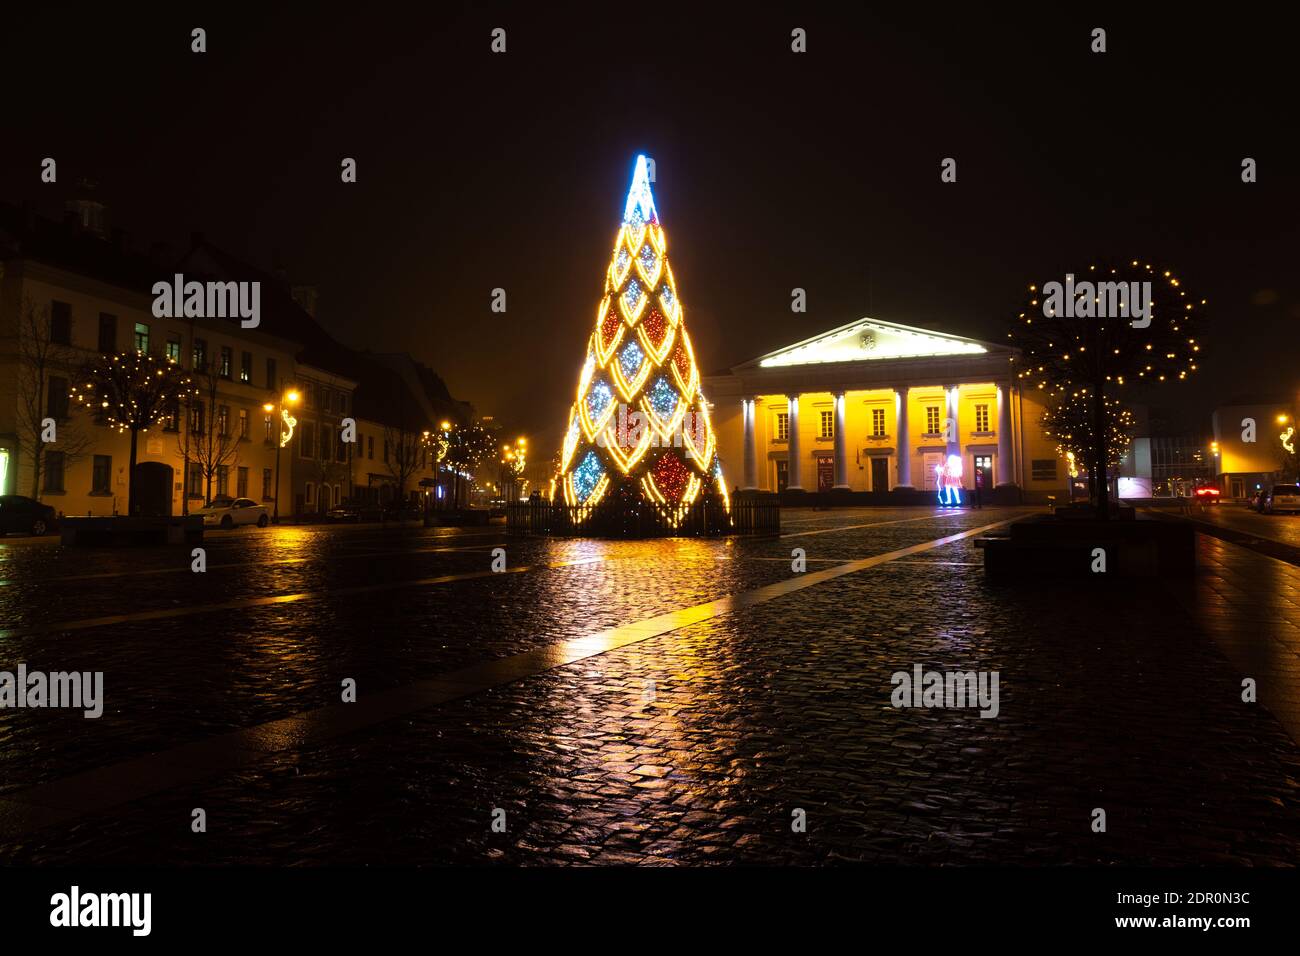 Vilnius Town Hall, Lithuania, Vilnius rotuse with Christmas tree and decorations, night Stock Photo